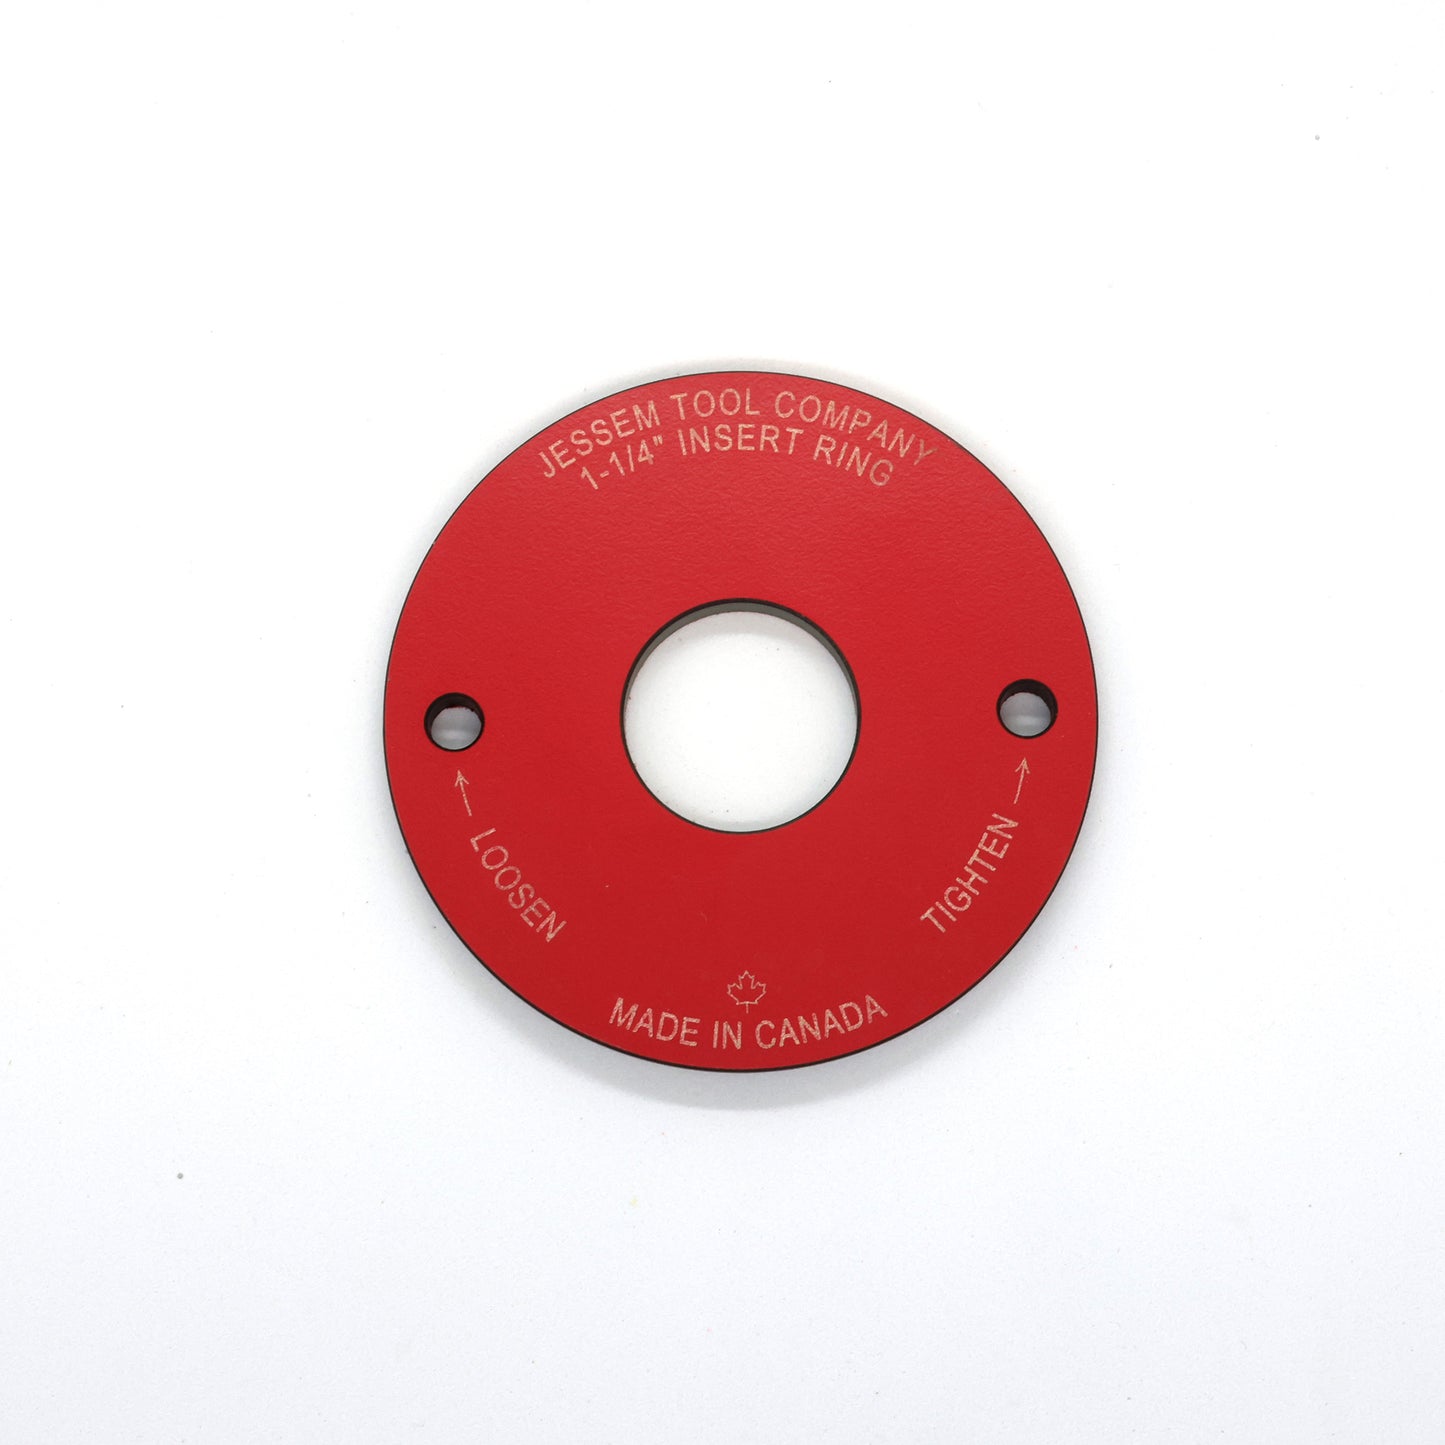 Phenolic Insert Rings For JessEm Router Lifts